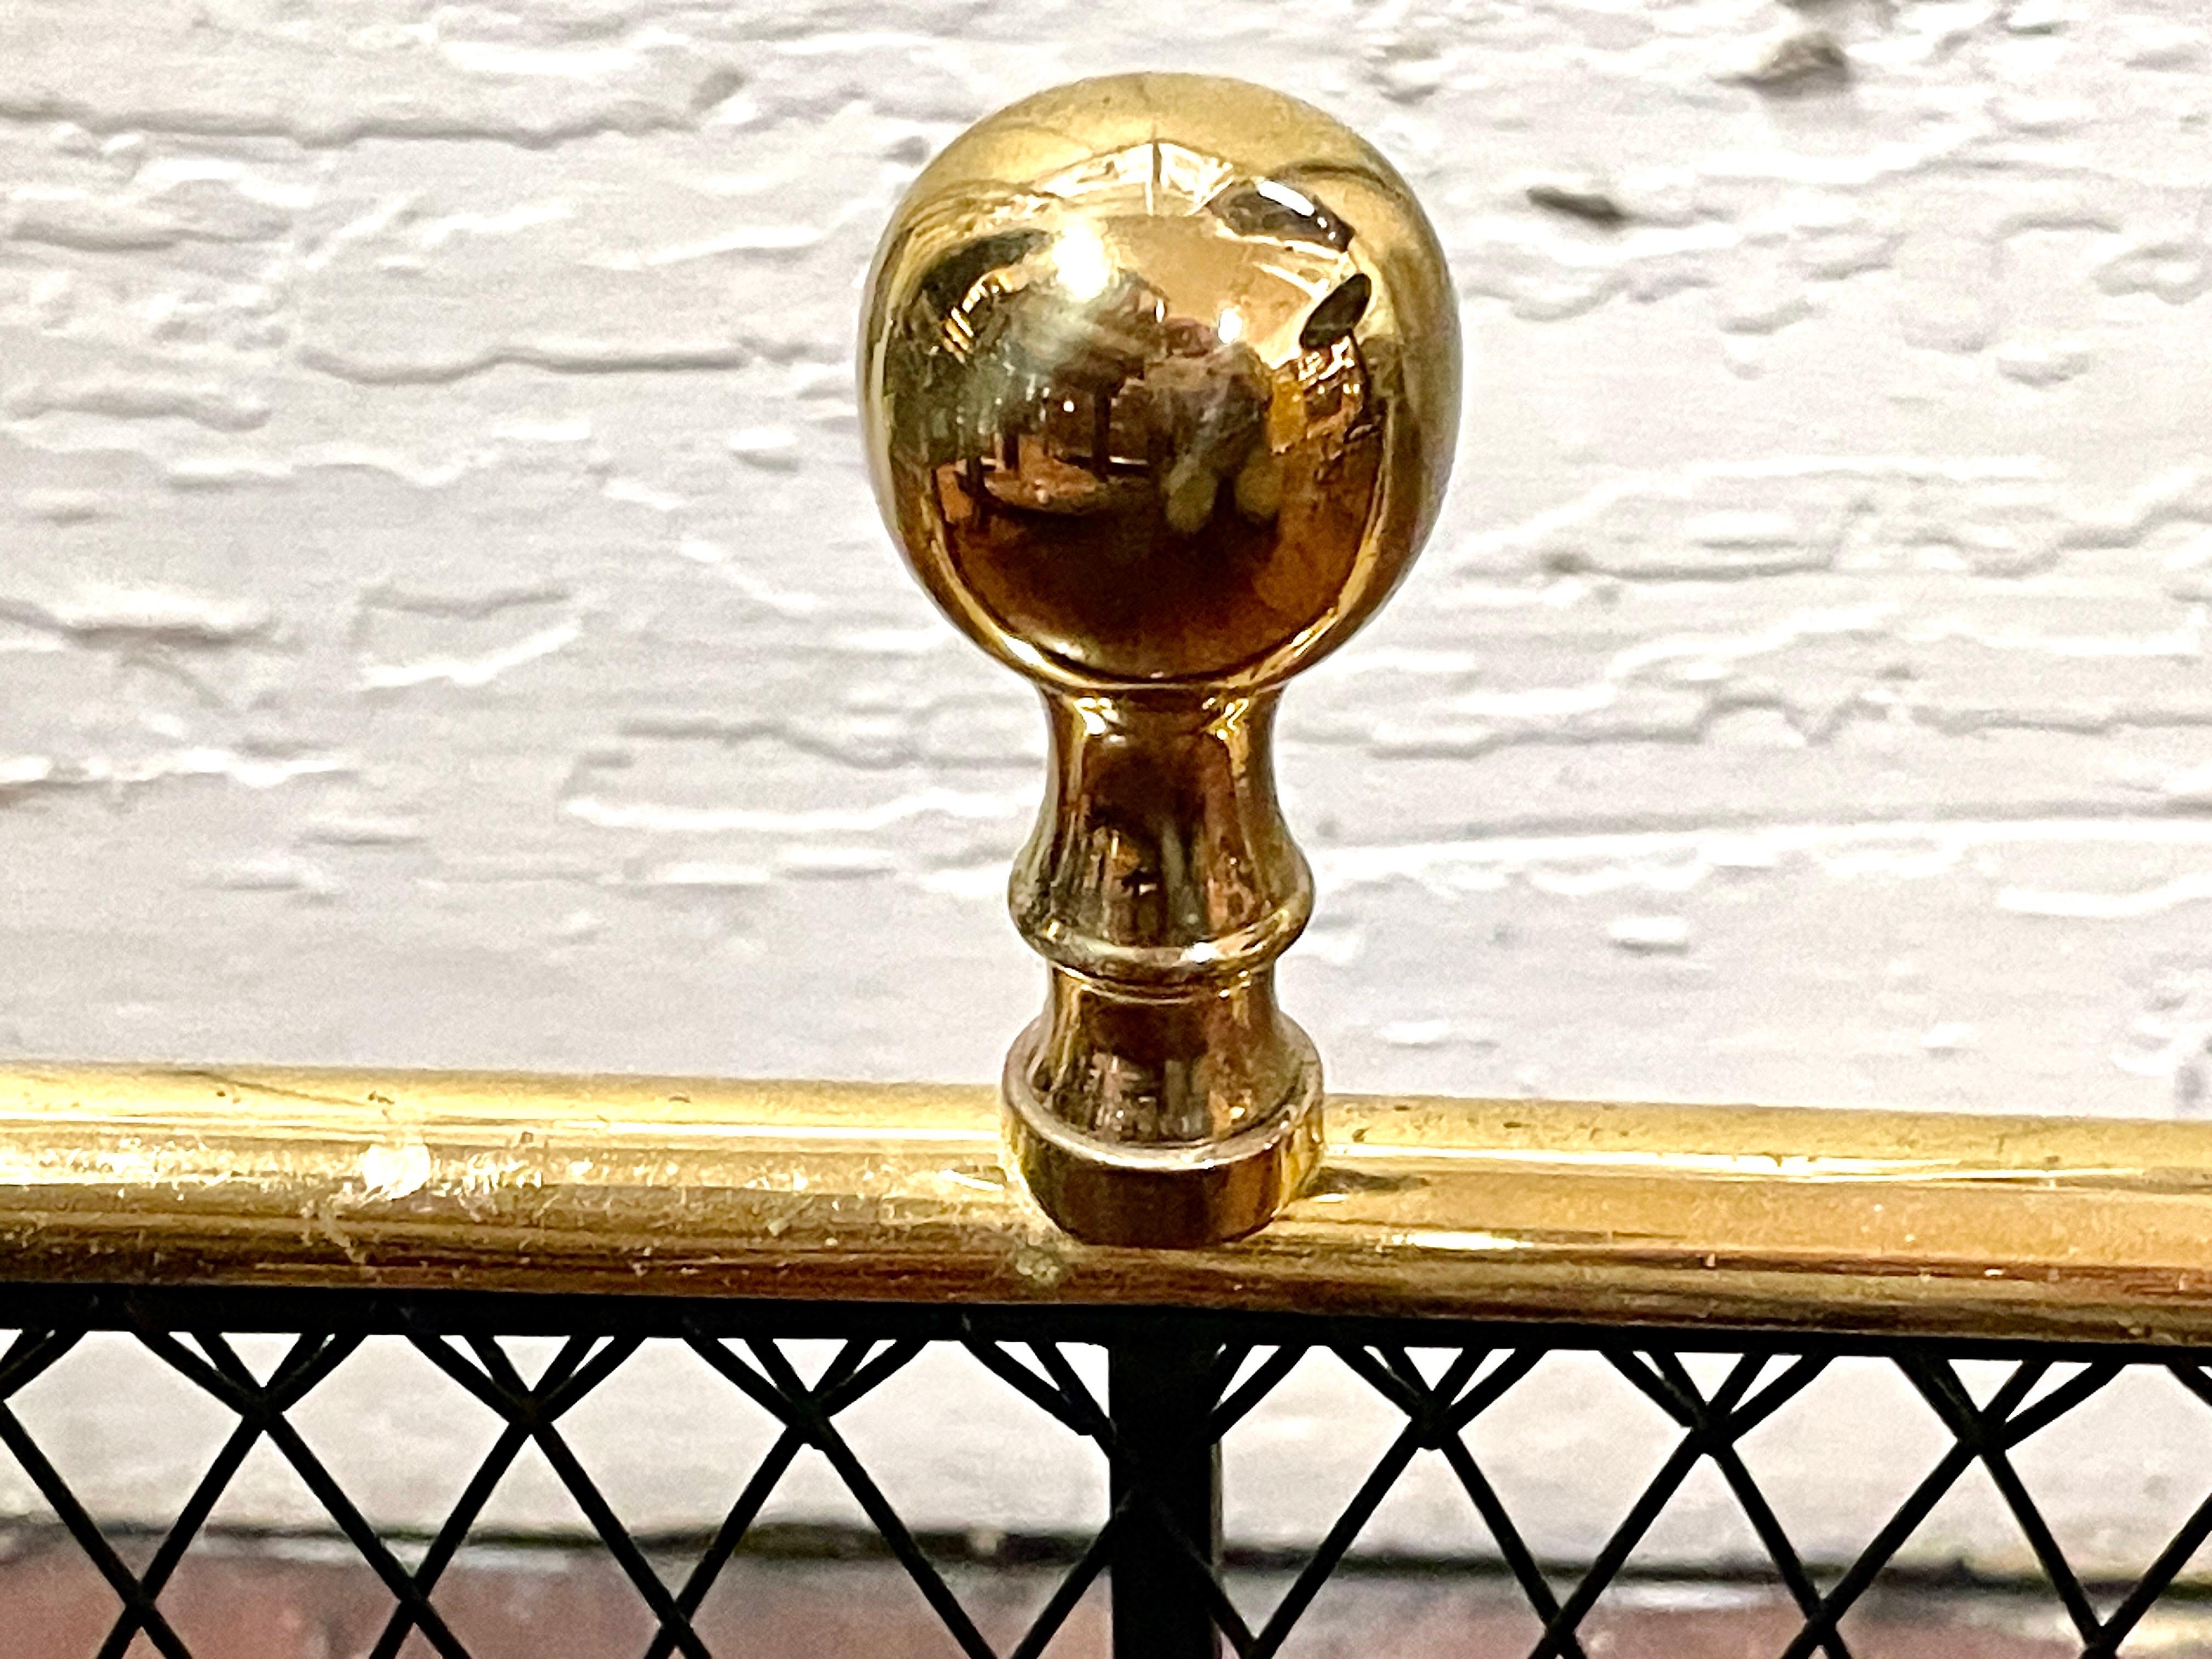 A Very Fine Old Reproduction heavy Cast Brass and fine hand woven wirework Serpentine Shape Fireplace Fender or Nursery Guard.  Please note the handsome cast brass lion's paw feet and heavy cast brass ball top finials.  The wirework is intricately